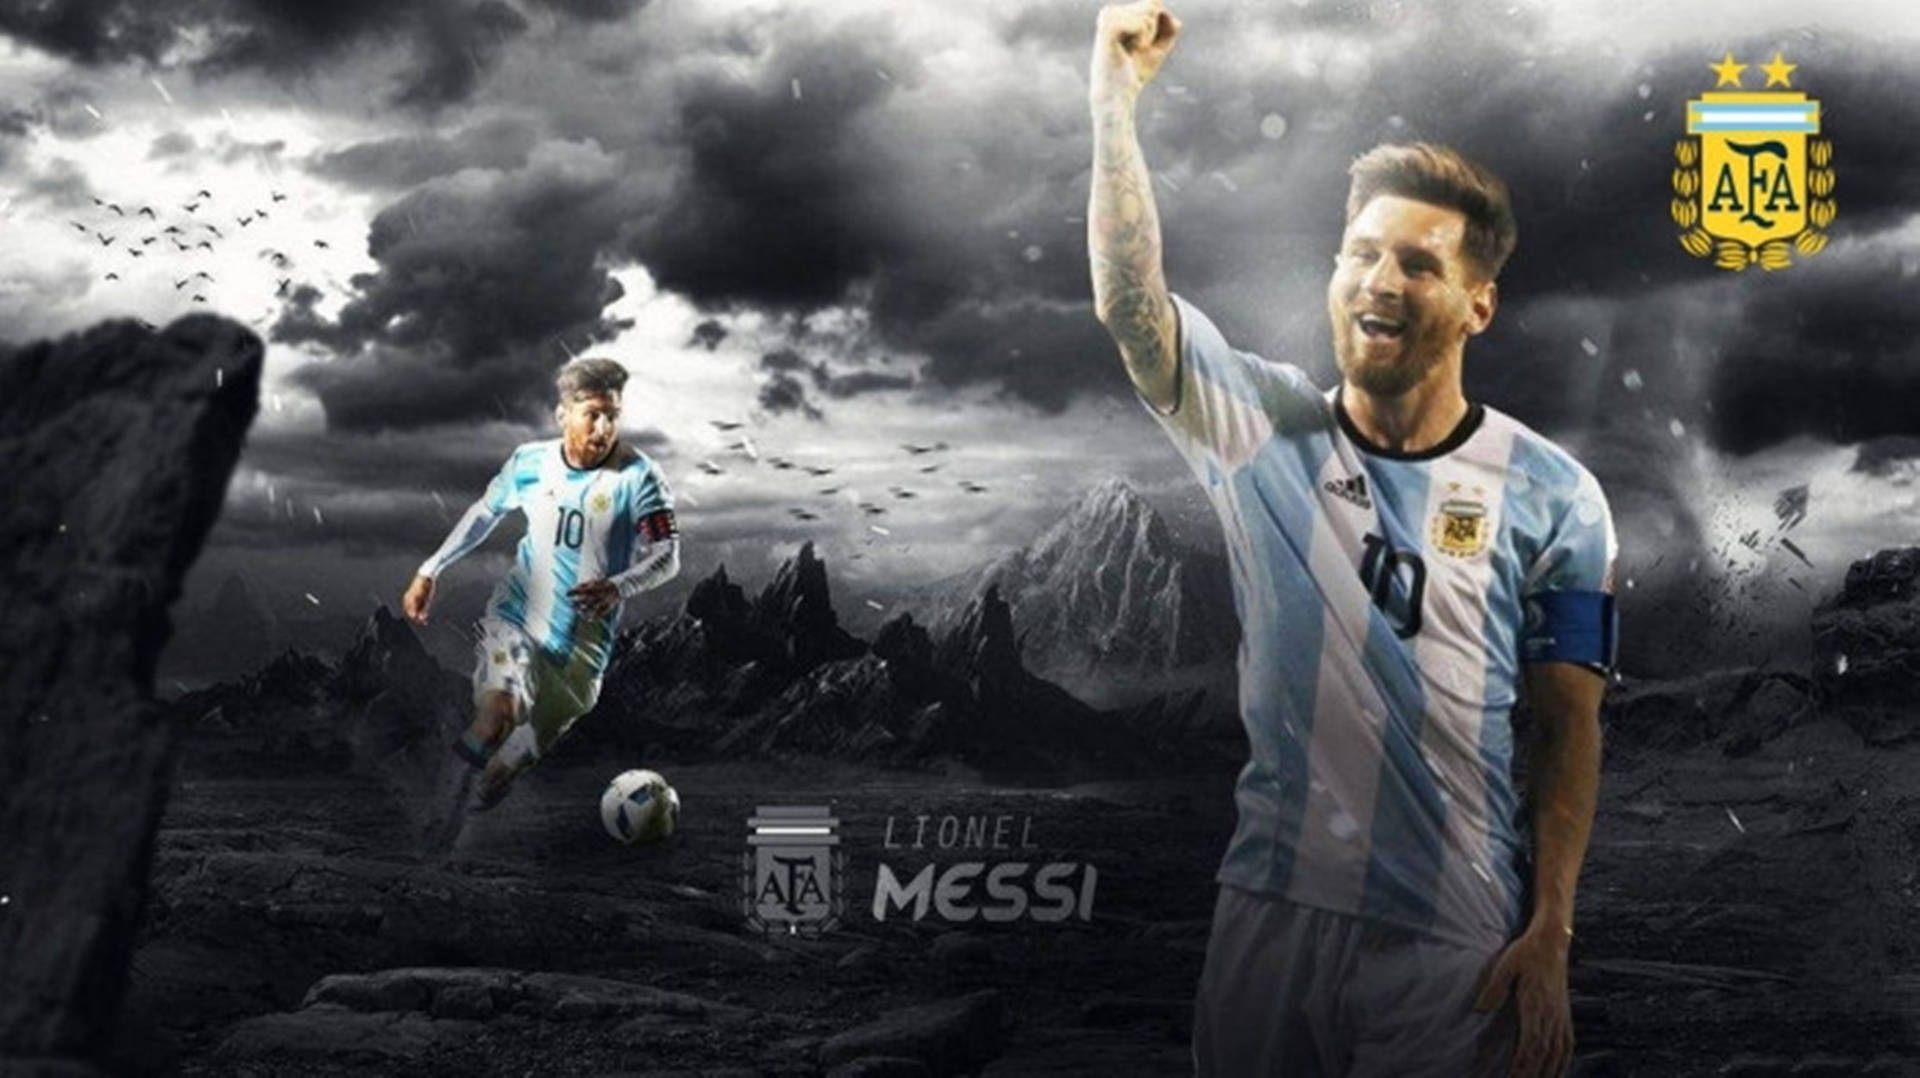 Free Lionel Messi Wallpaper Downloads, [300+] Lionel Messi Wallpapers for  FREE 